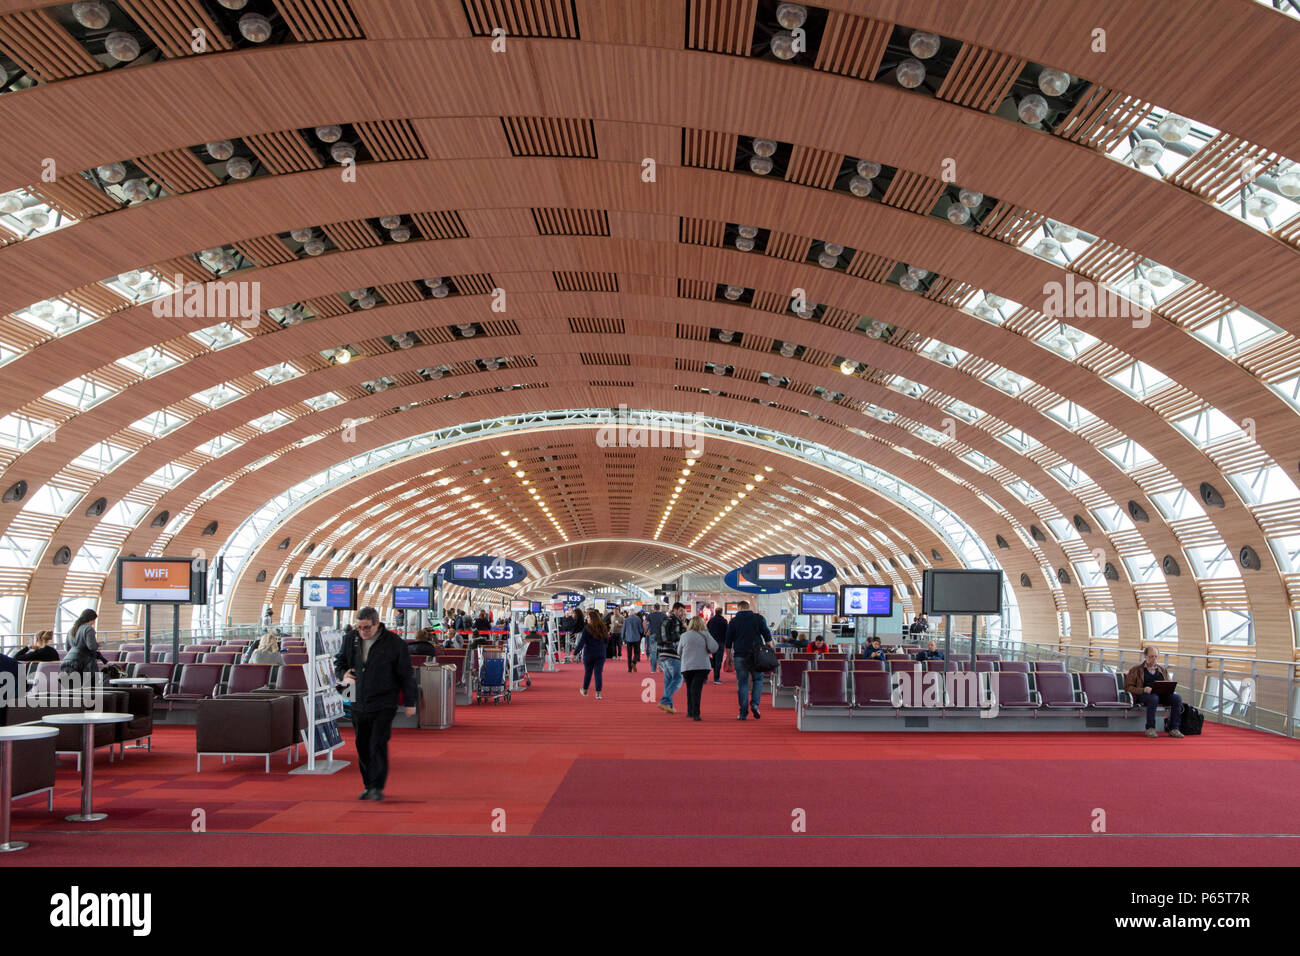 Terminal 2 at Paris Charles de Gaulle Airport in France Stock Photo